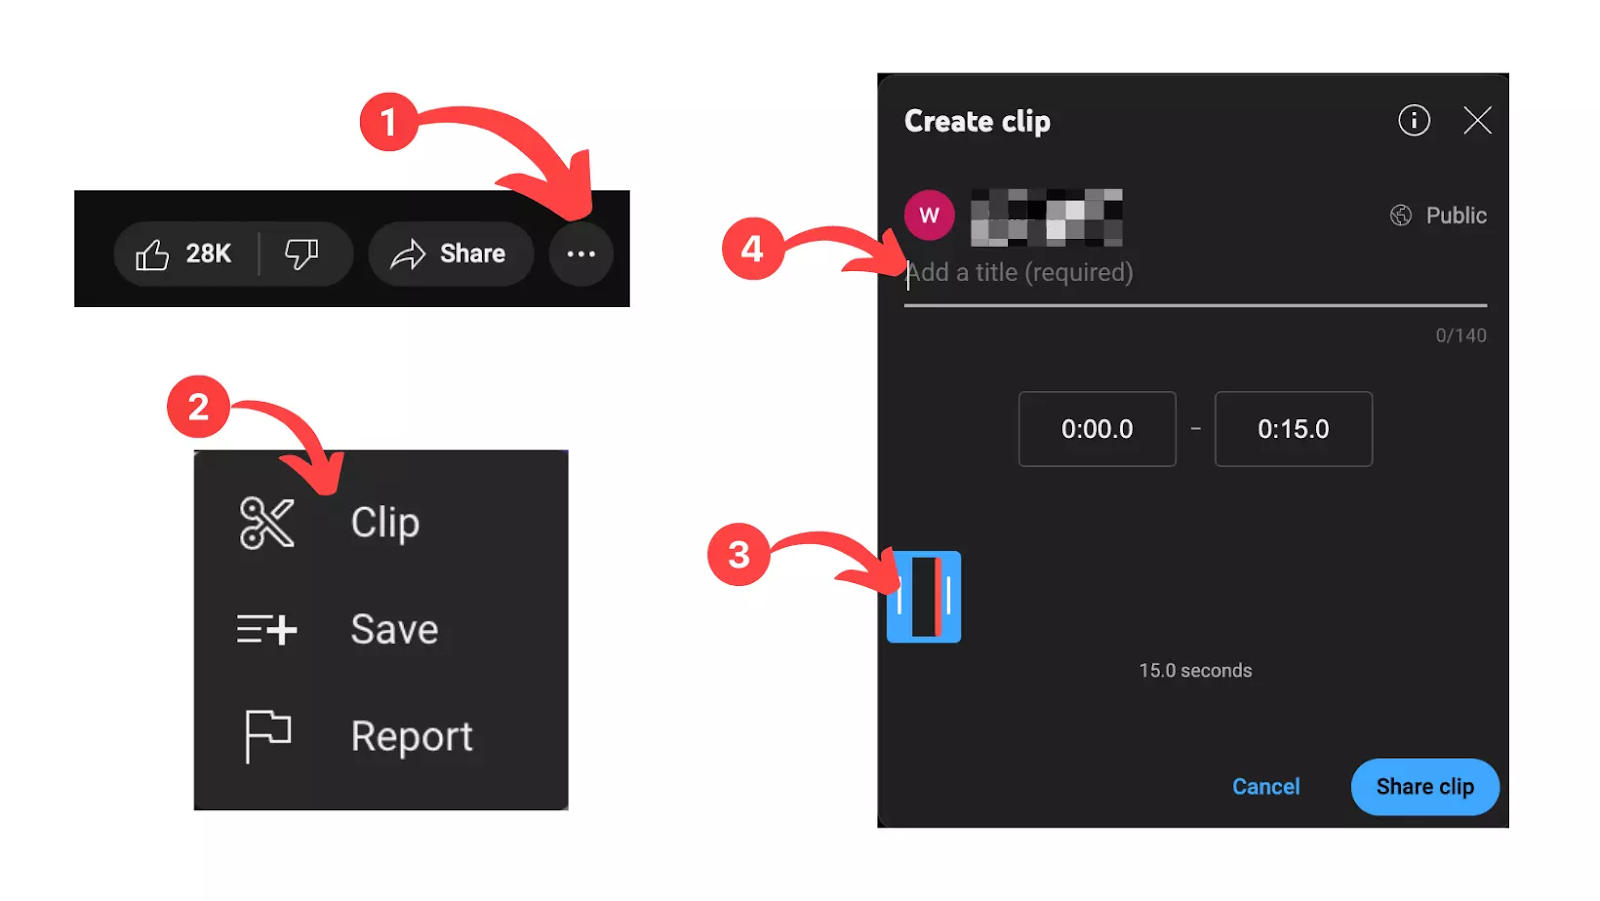 This is an image showing how to create YouTube clips within YouTube App